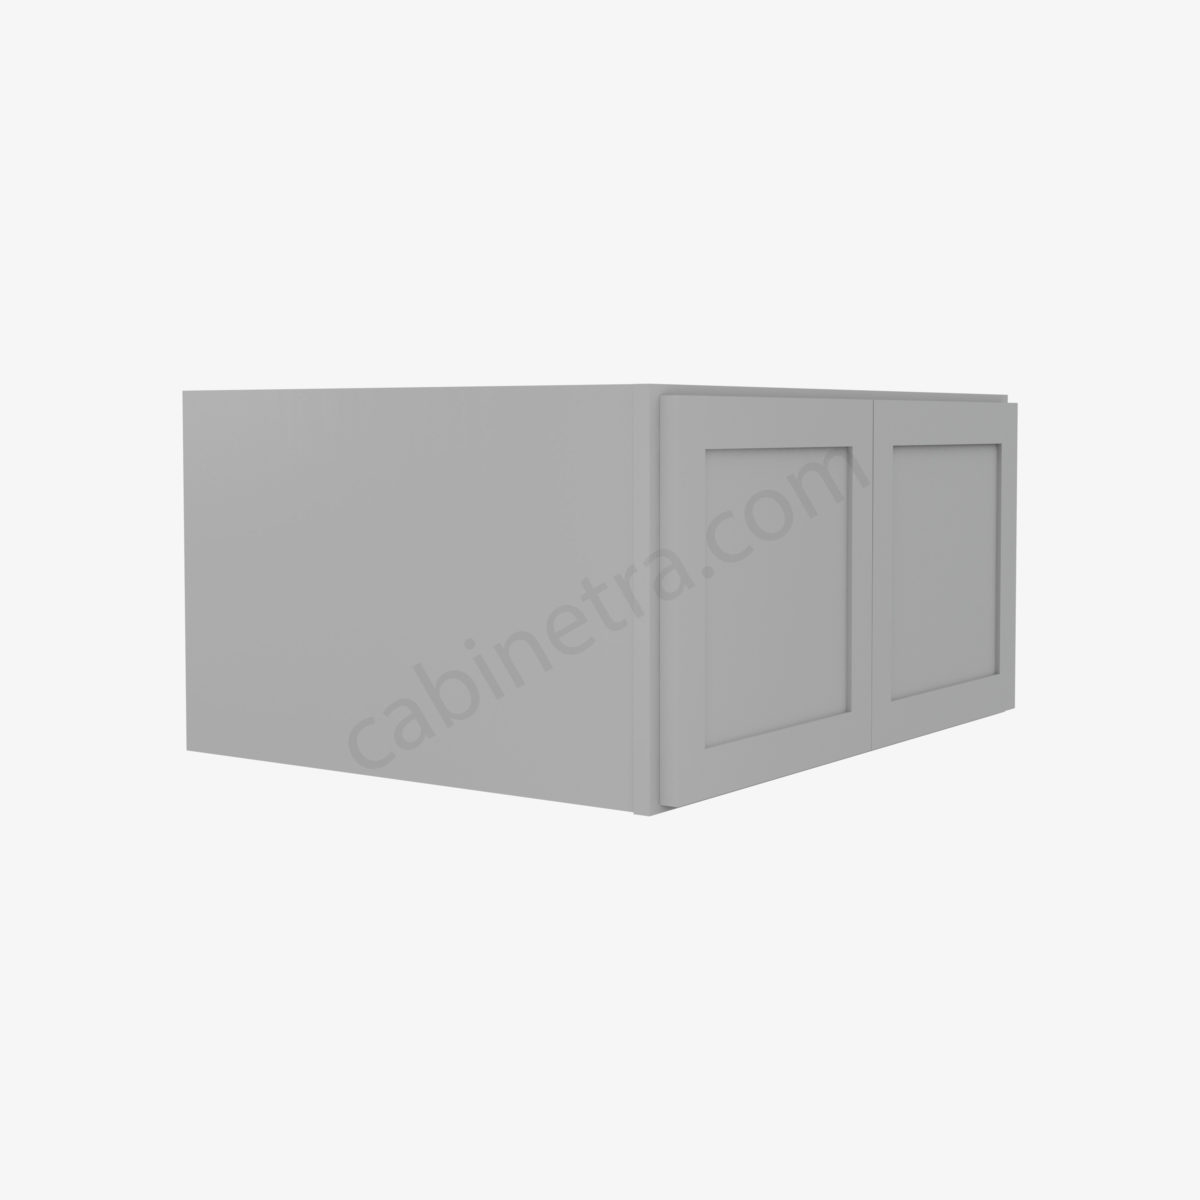 AB W301524B 4 Forevermark Lait Gray Shaker Cabinetra scaled